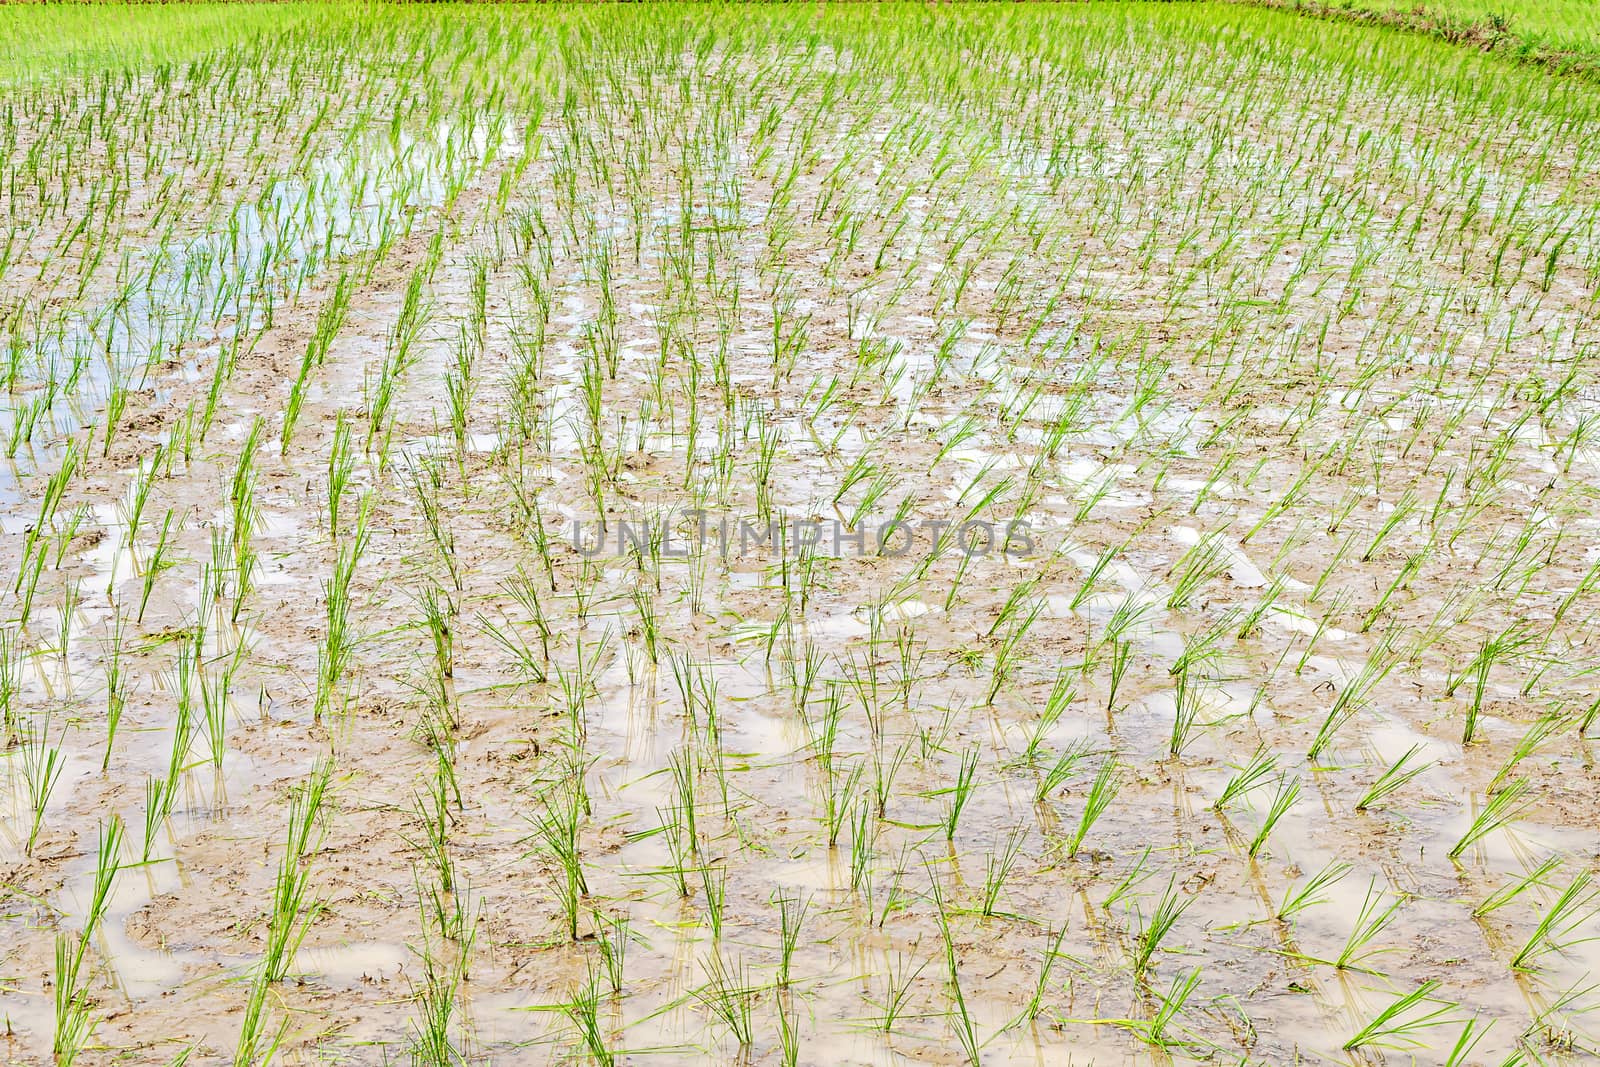 Paddy fields in northern part of Thailand